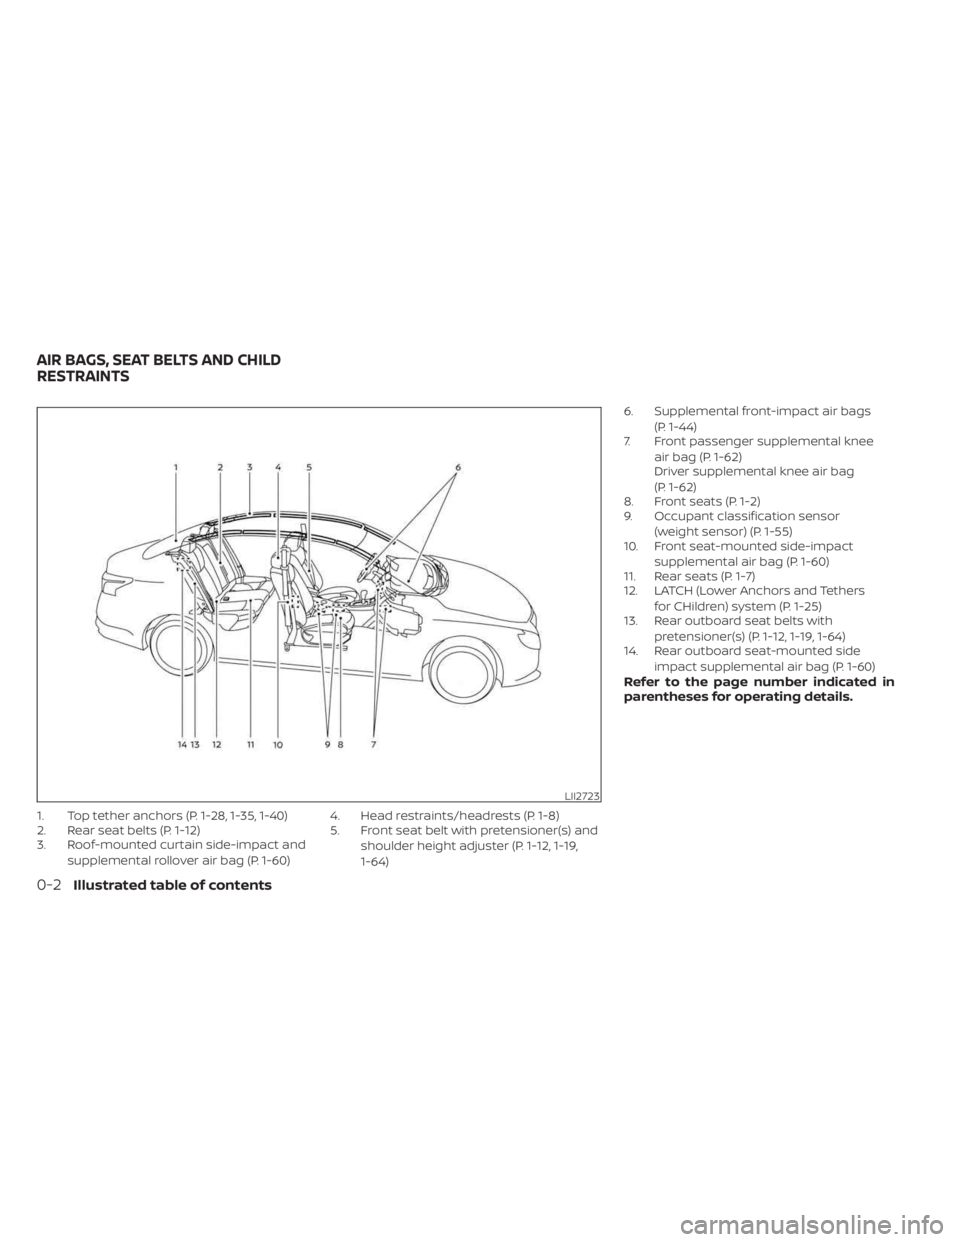 NISSAN SENTRA 2023  Owners Manual 1. Top tether anchors (P. 1-28, 1-35, 1-40)
2. Rear seat belts (P. 1-12)
3. Roof-mounted curtain side-impact andsupplemental rollover air bag (P. 1-60) 4. Head restraints/headrests (P. 1-8)
5. Front s